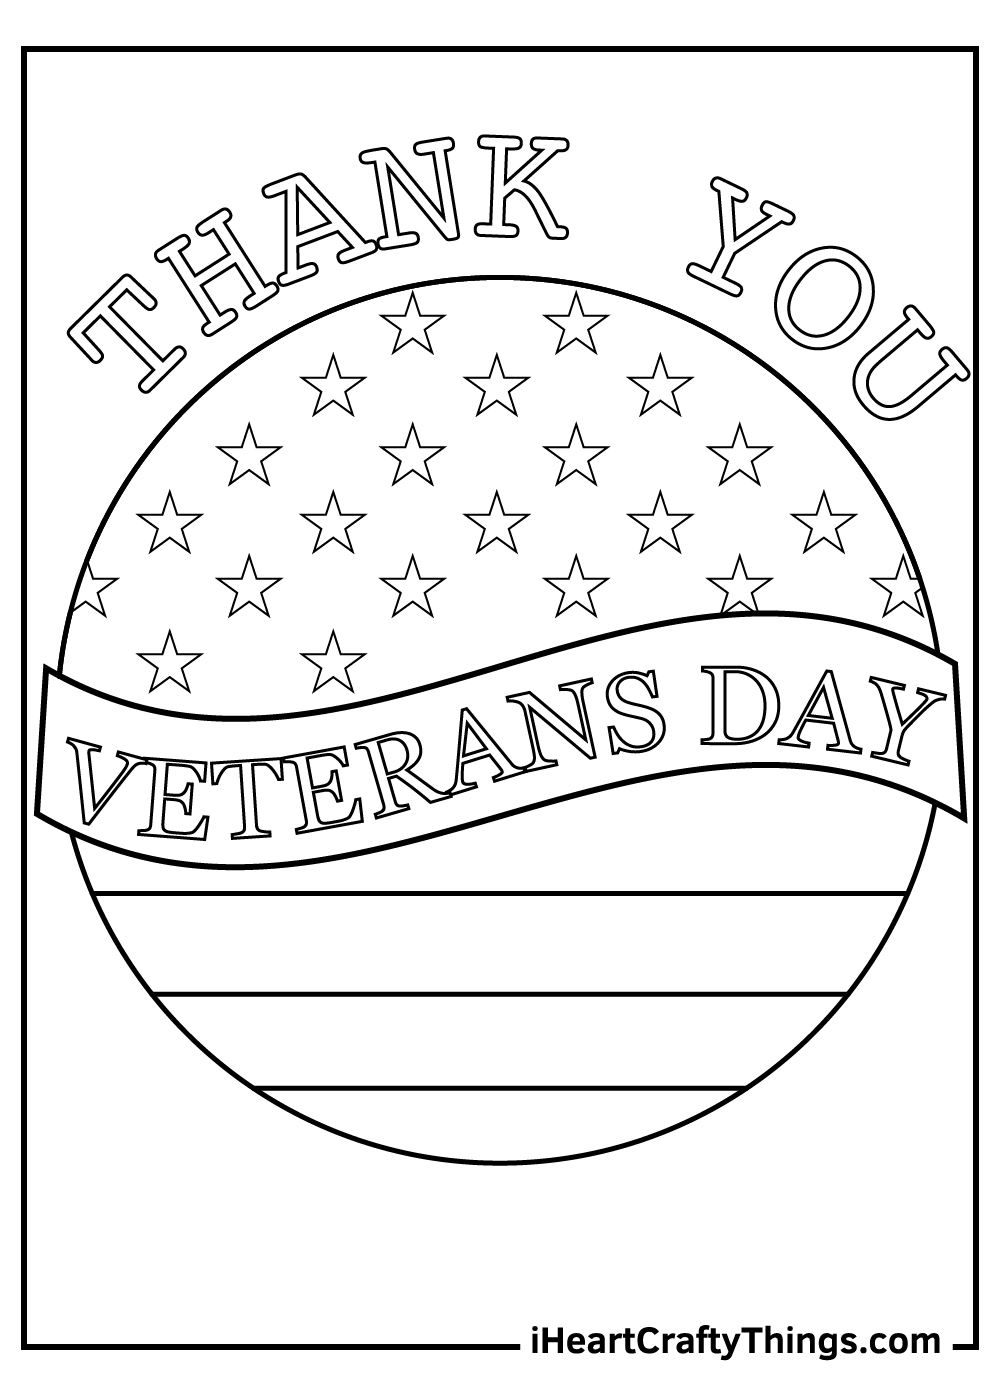 Printable Veteran s Day Coloring Pages Updated 2021 